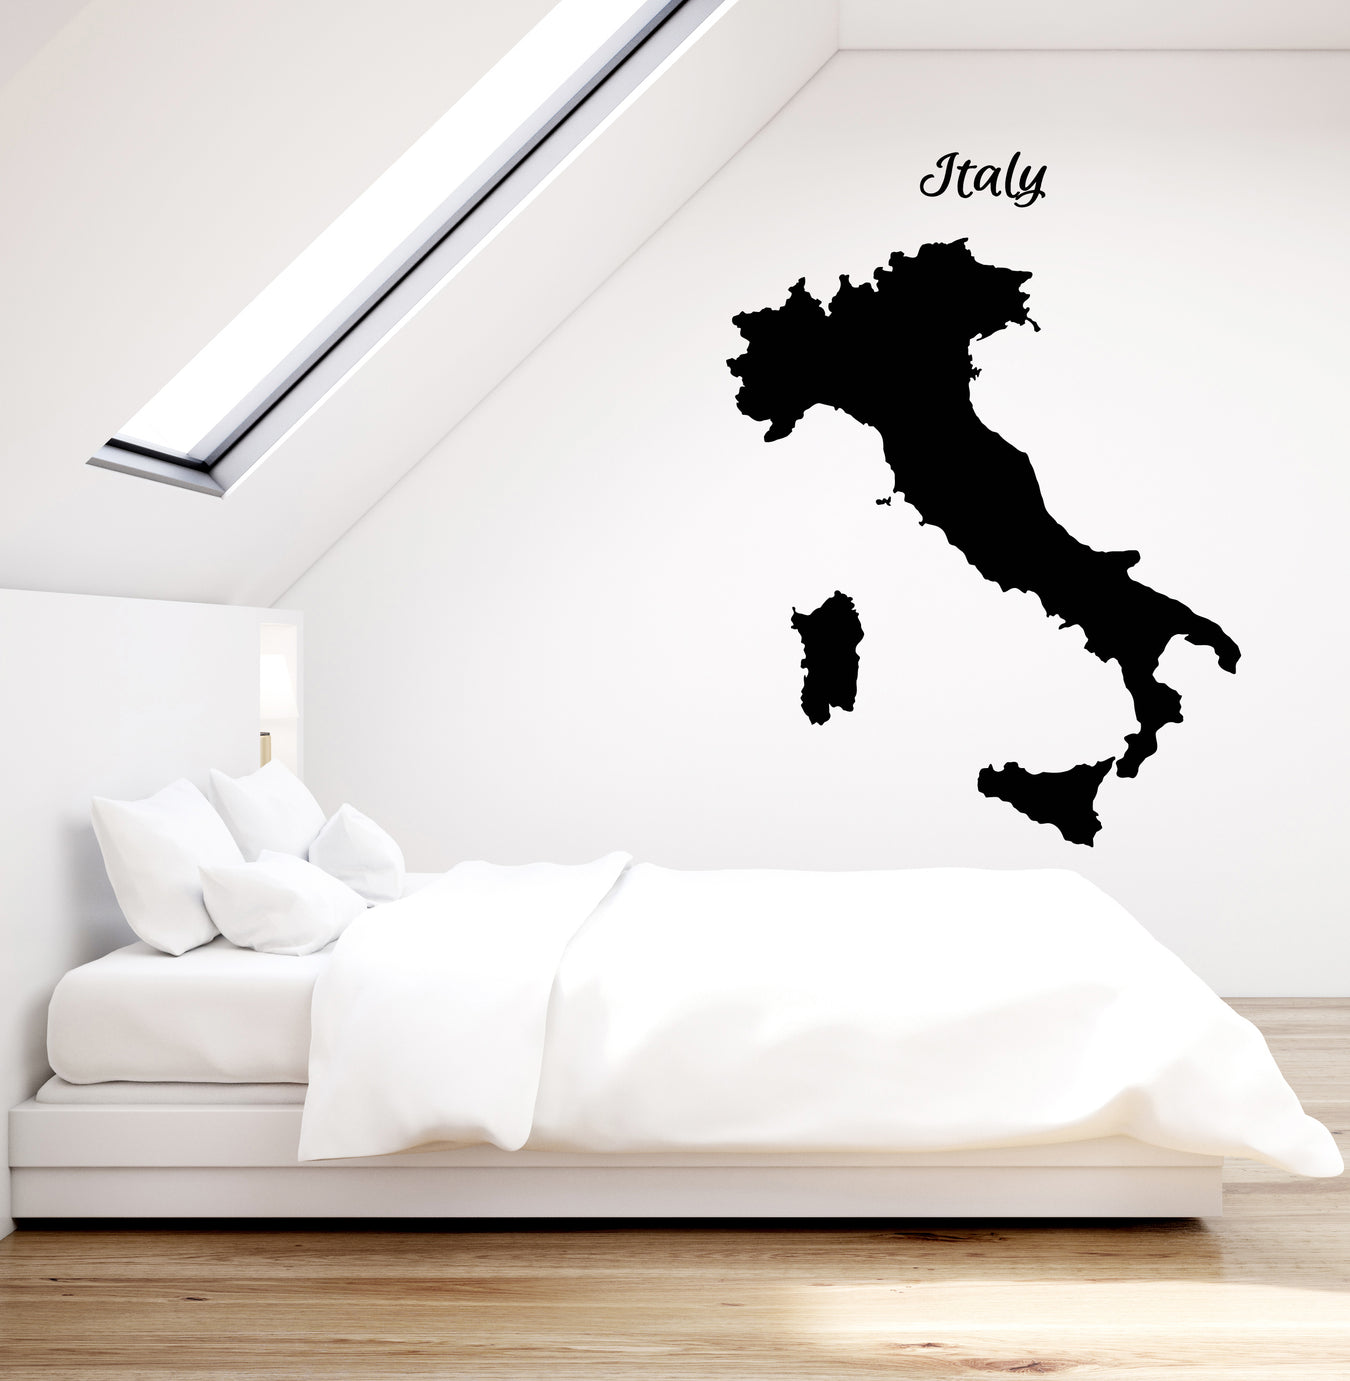 Travel Agency Wall Decals